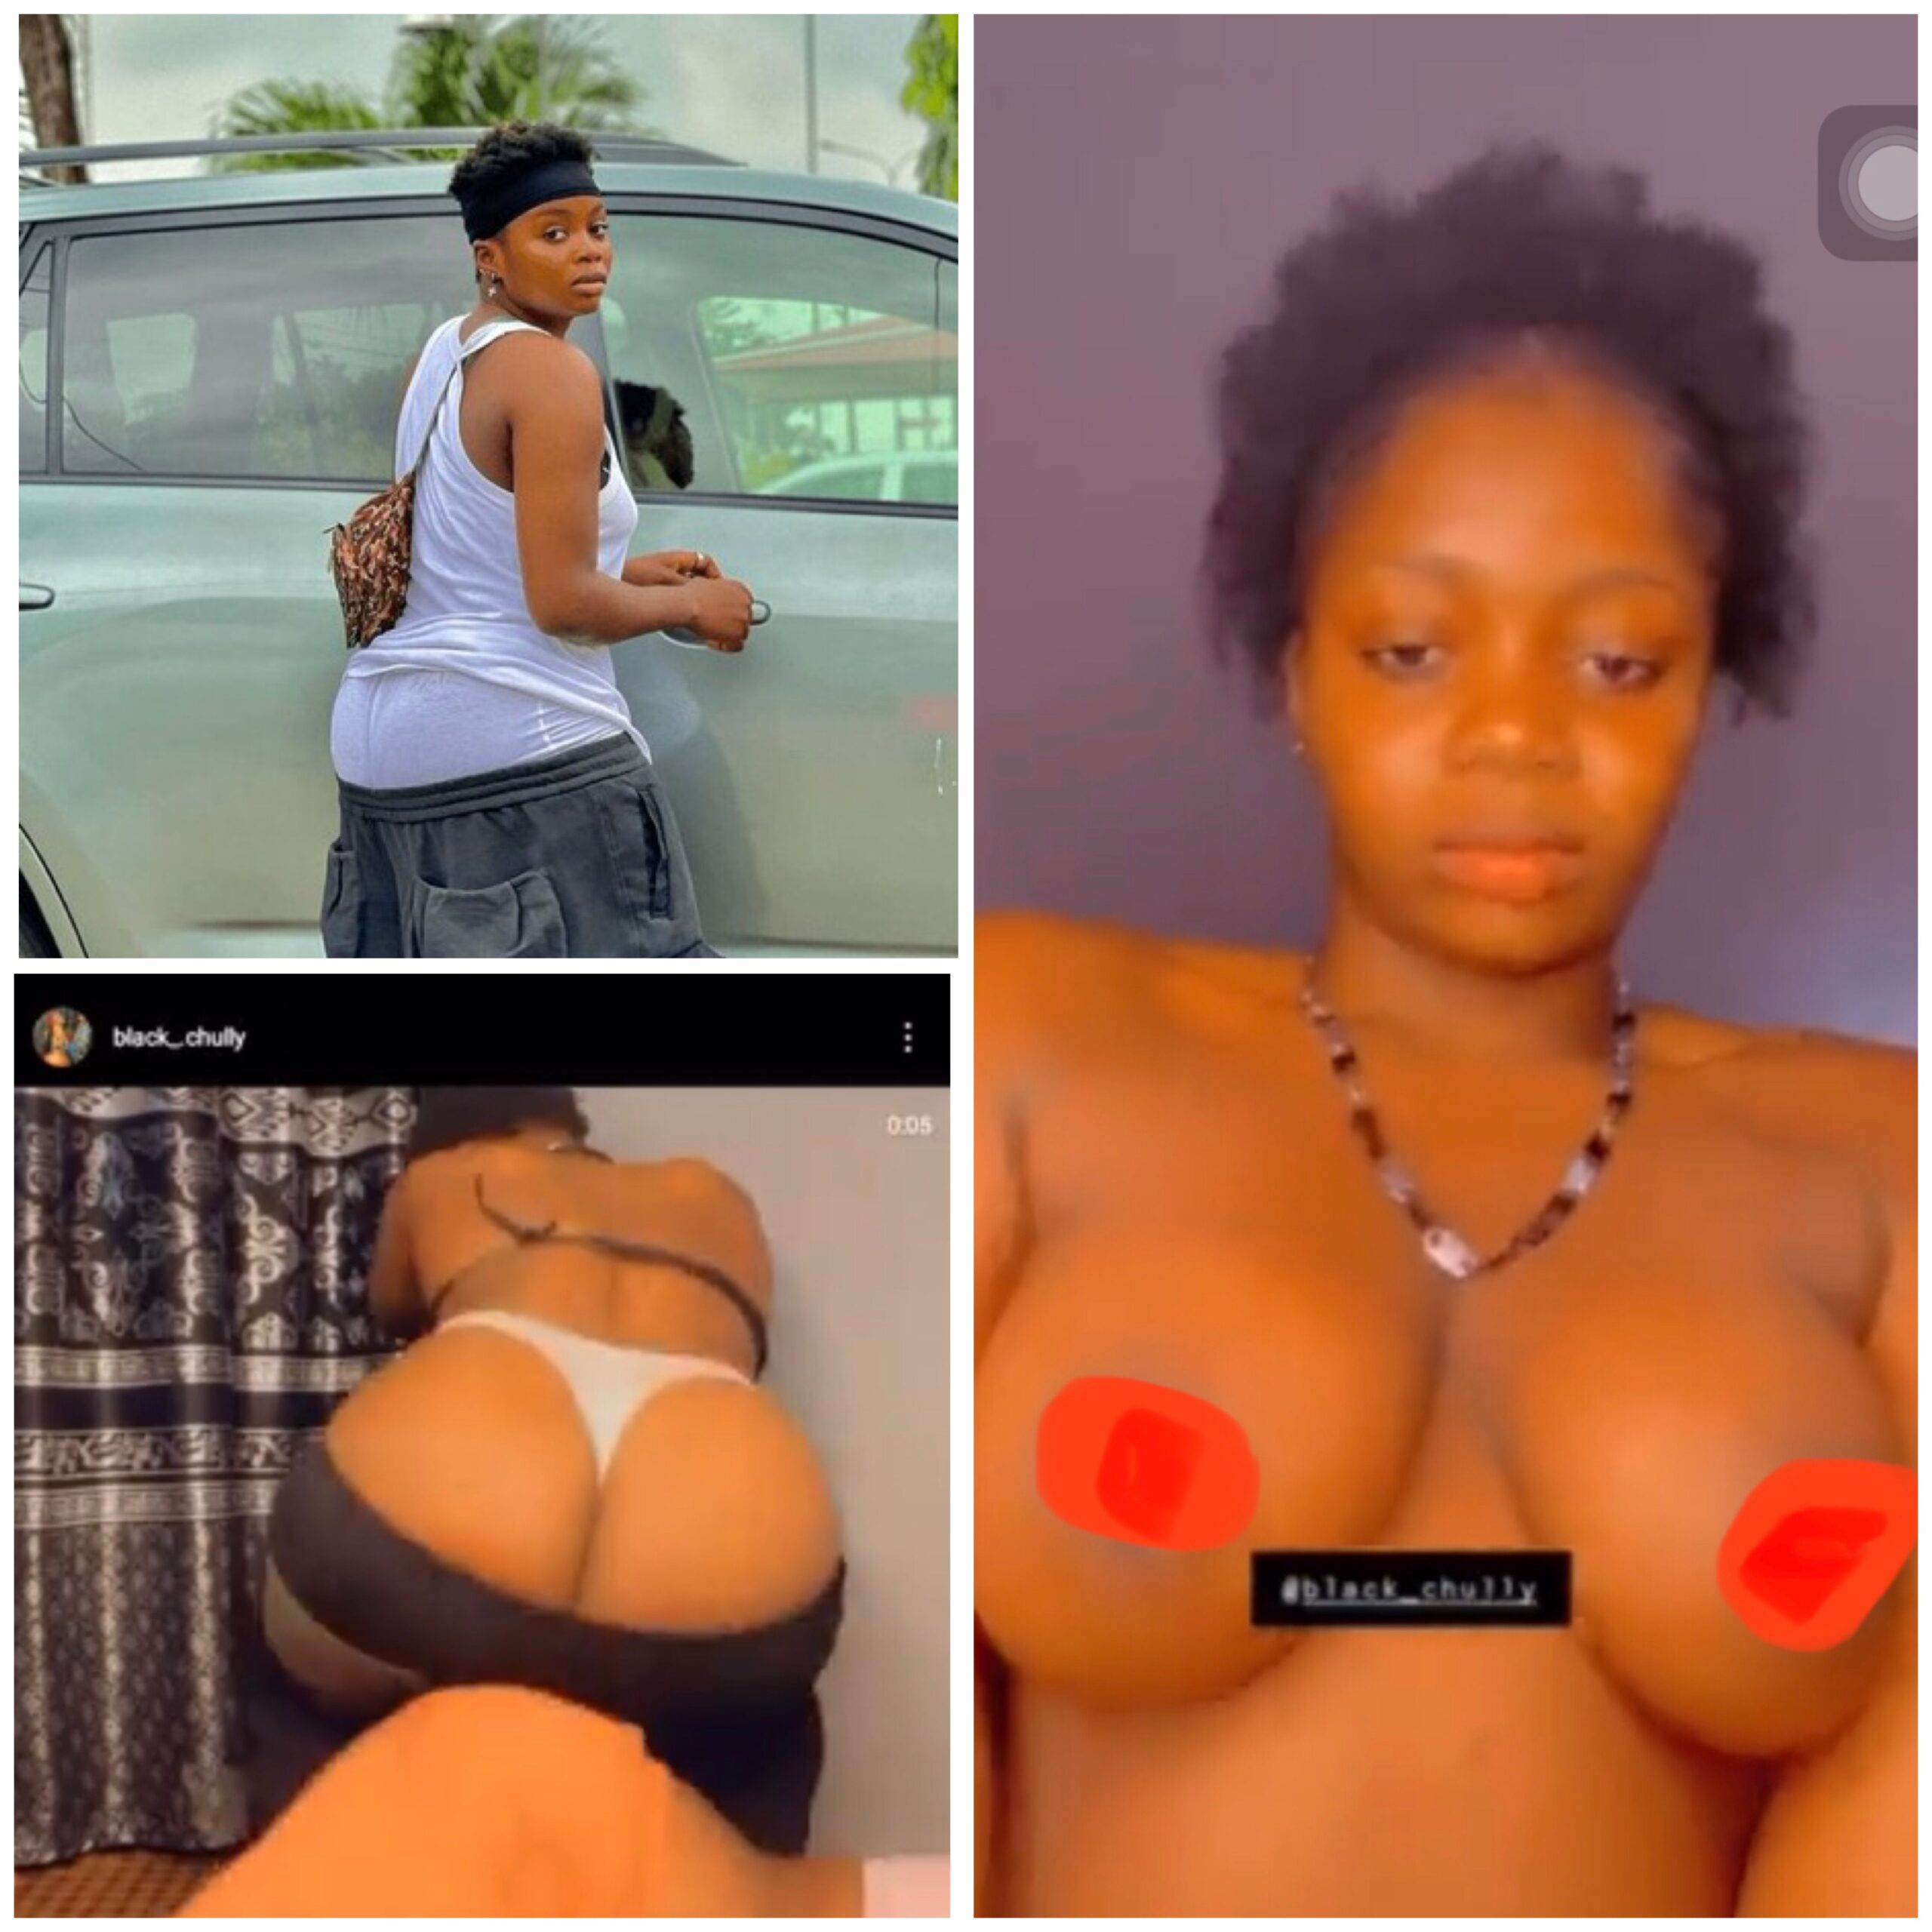 Watch Blackchully Twitter Video – Leaked Trends